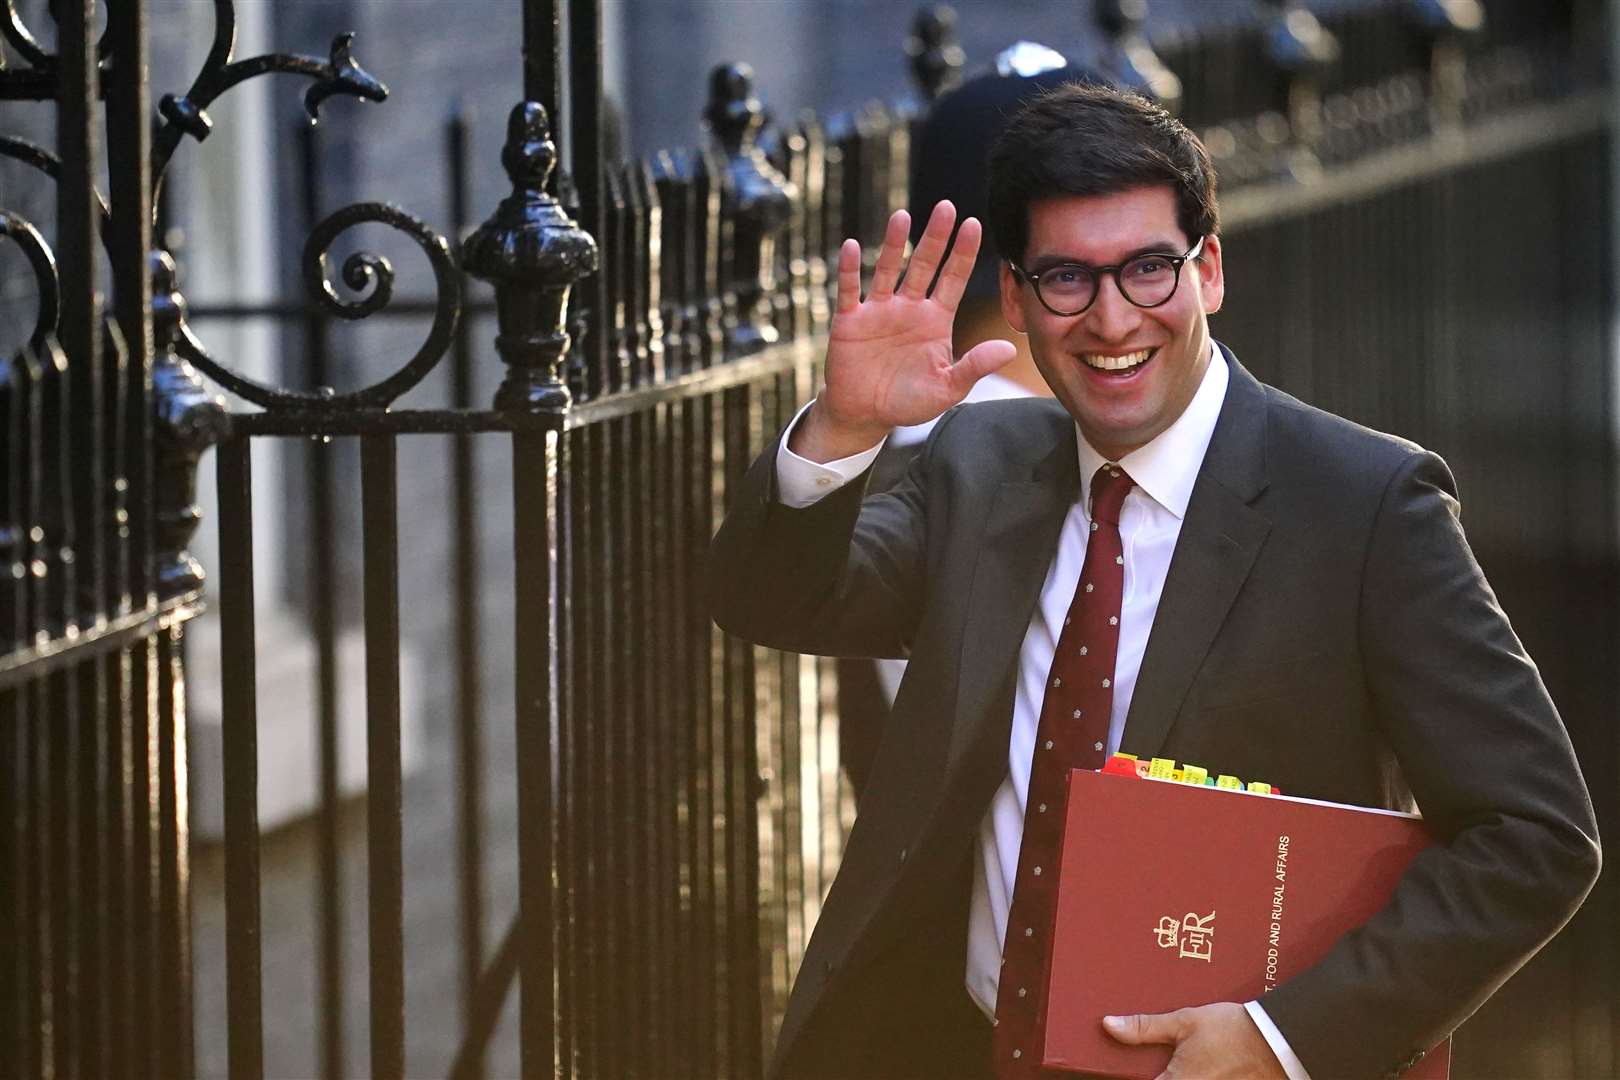 New Environment Secretary Ranil Jayawardena arrives in Downing Street for the first meeting of Liz Truss’s Cabinet (Victoria Jones/PA)